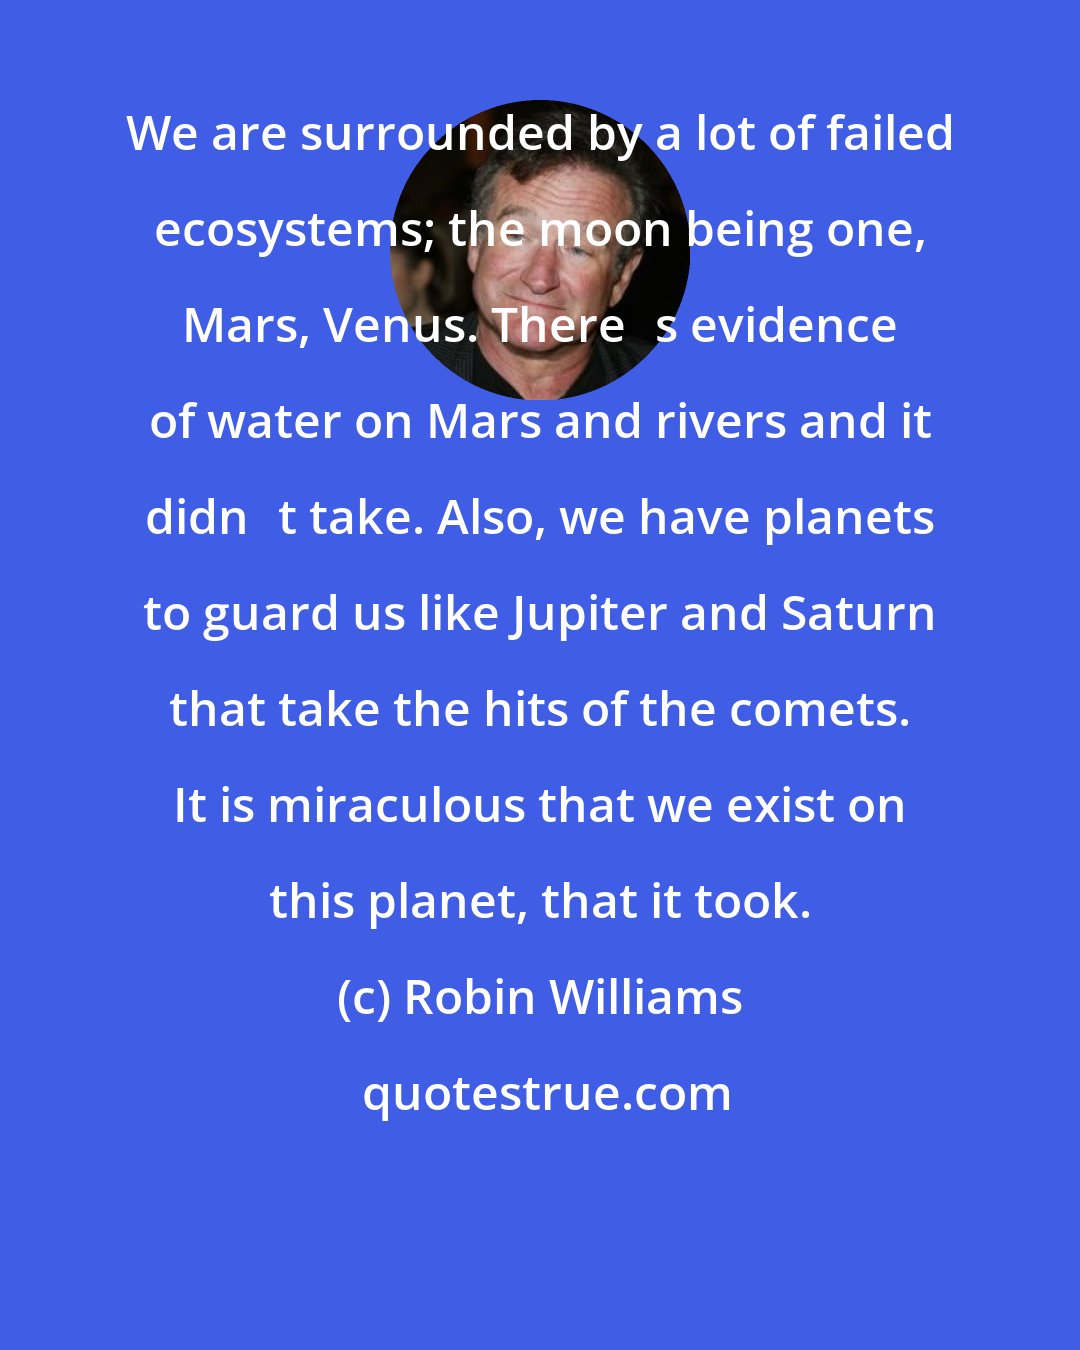 Robin Williams: We are surrounded by a lot of failed ecosystems; the moon being one, Mars, Venus. Theres evidence of water on Mars and rivers and it didnt take. Also, we have planets to guard us like Jupiter and Saturn that take the hits of the comets. It is miraculous that we exist on this planet, that it took.